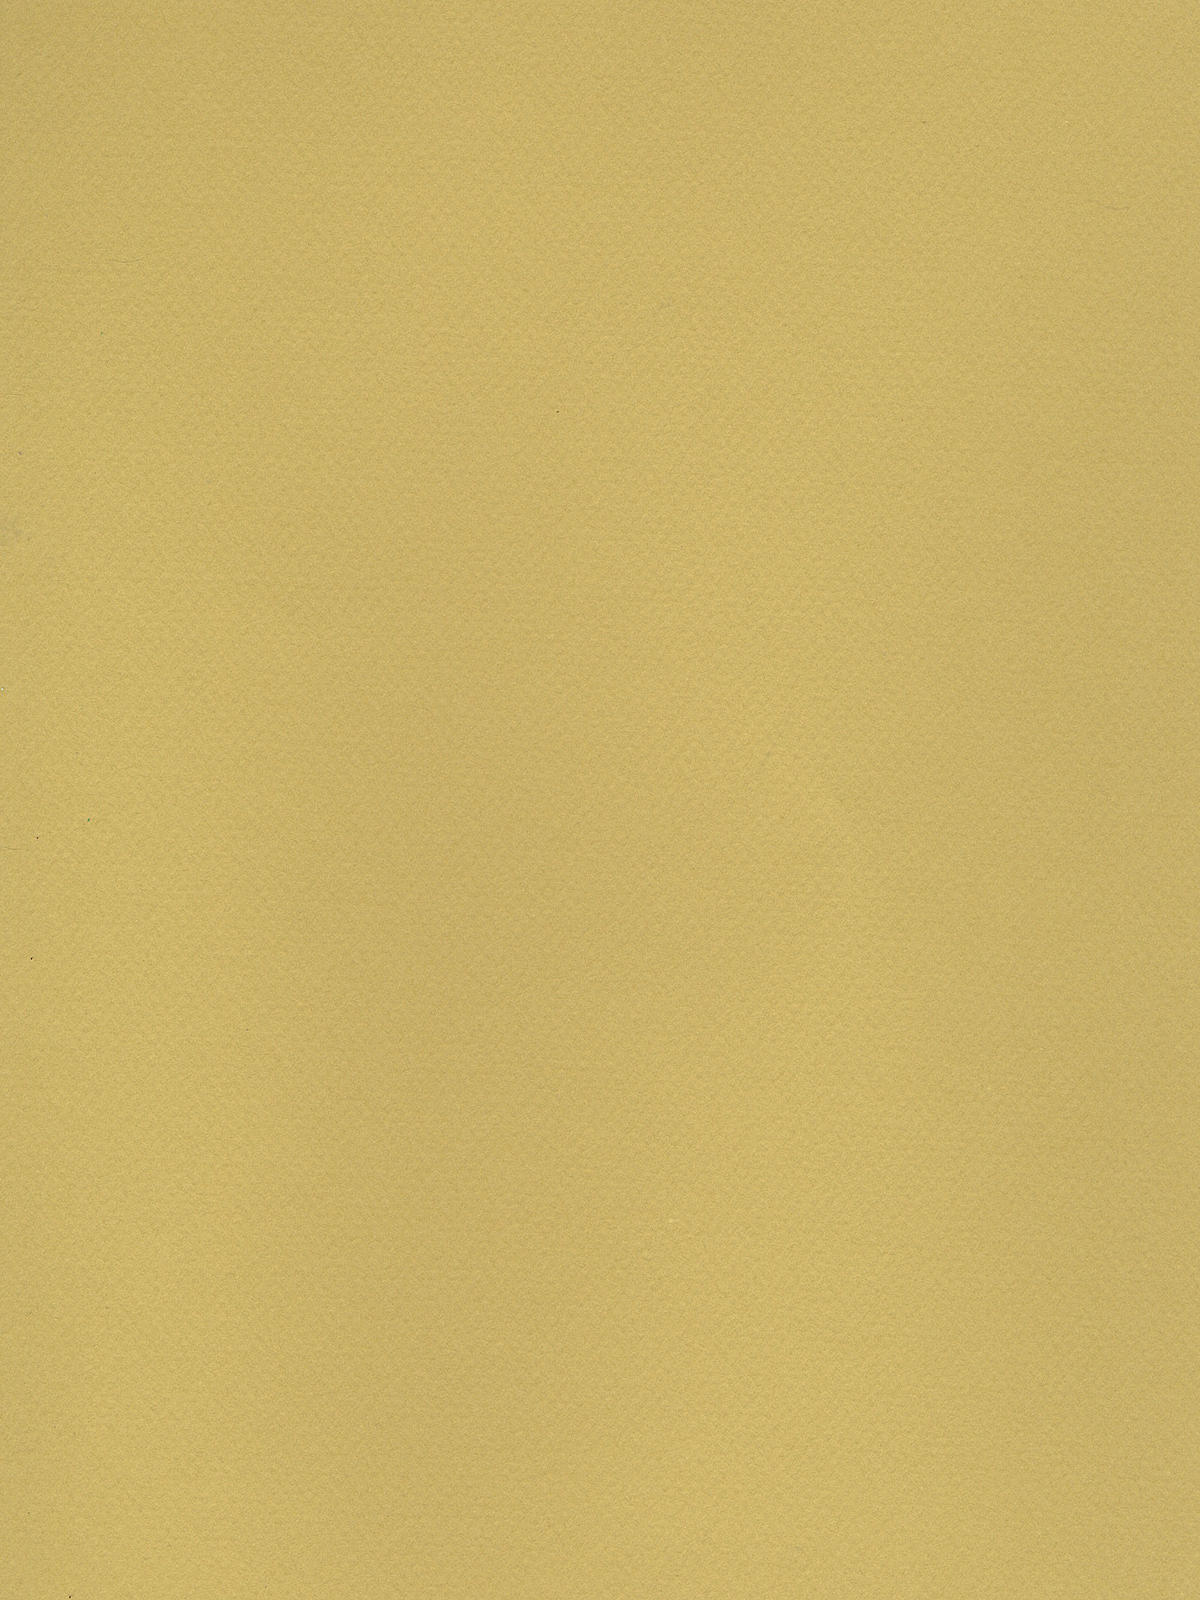 Mi-teintes Tinted Paper Anise 19 In. X 25 In.